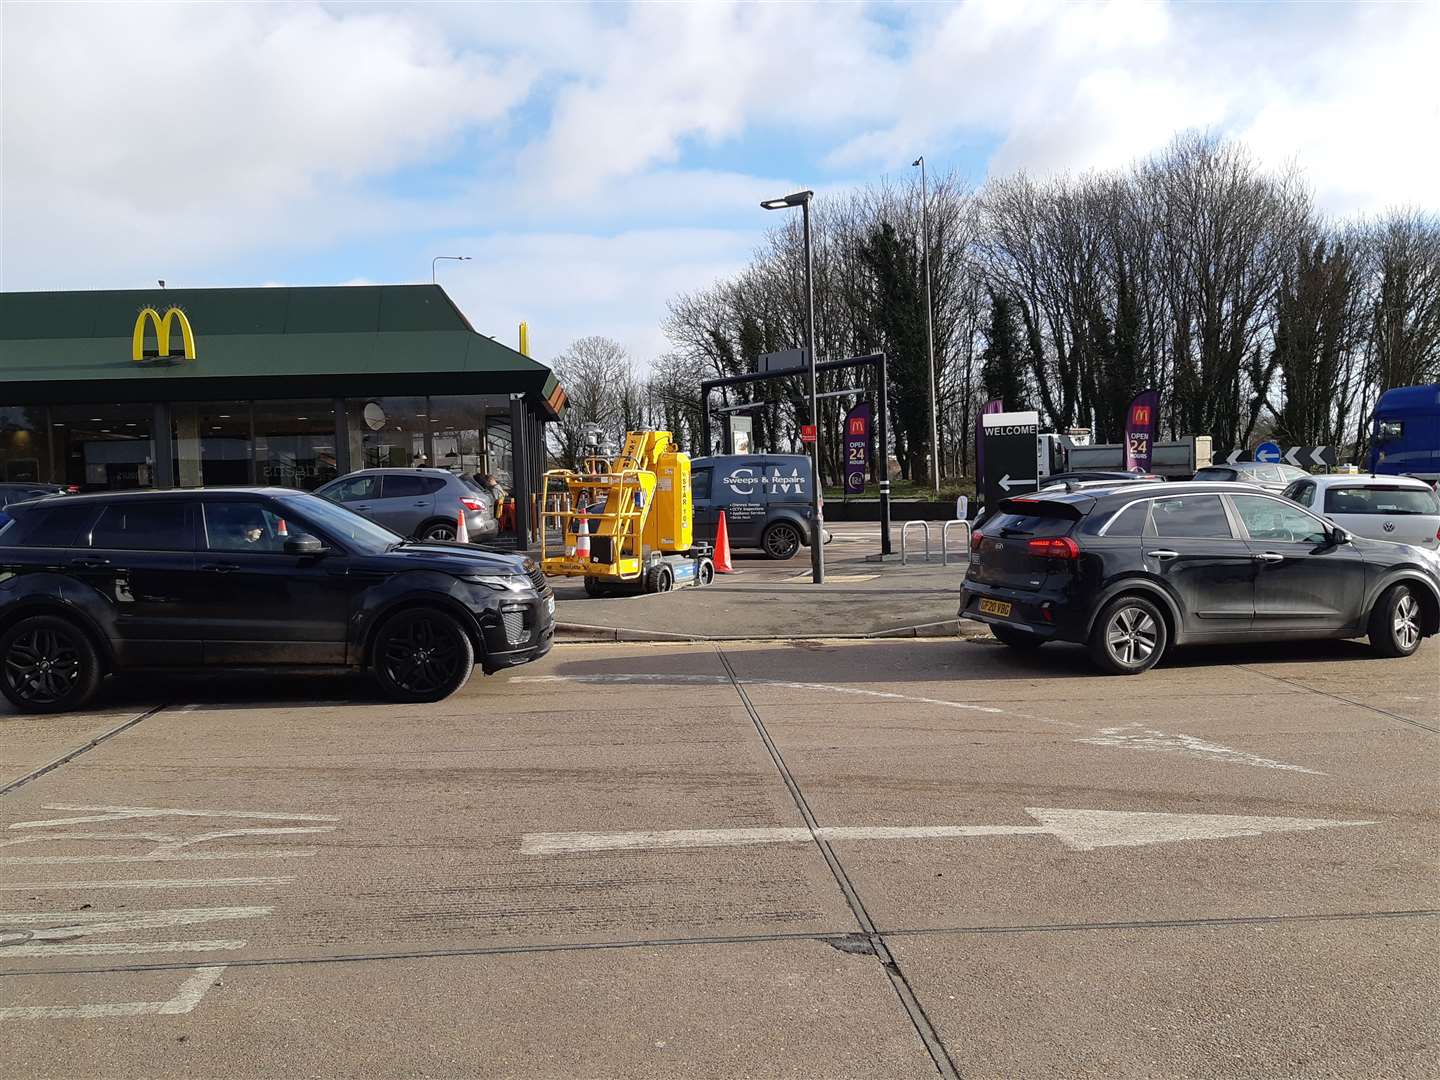 Customers in cars going to the McDonald's drive-through. Picture: Sam Lennon KMG